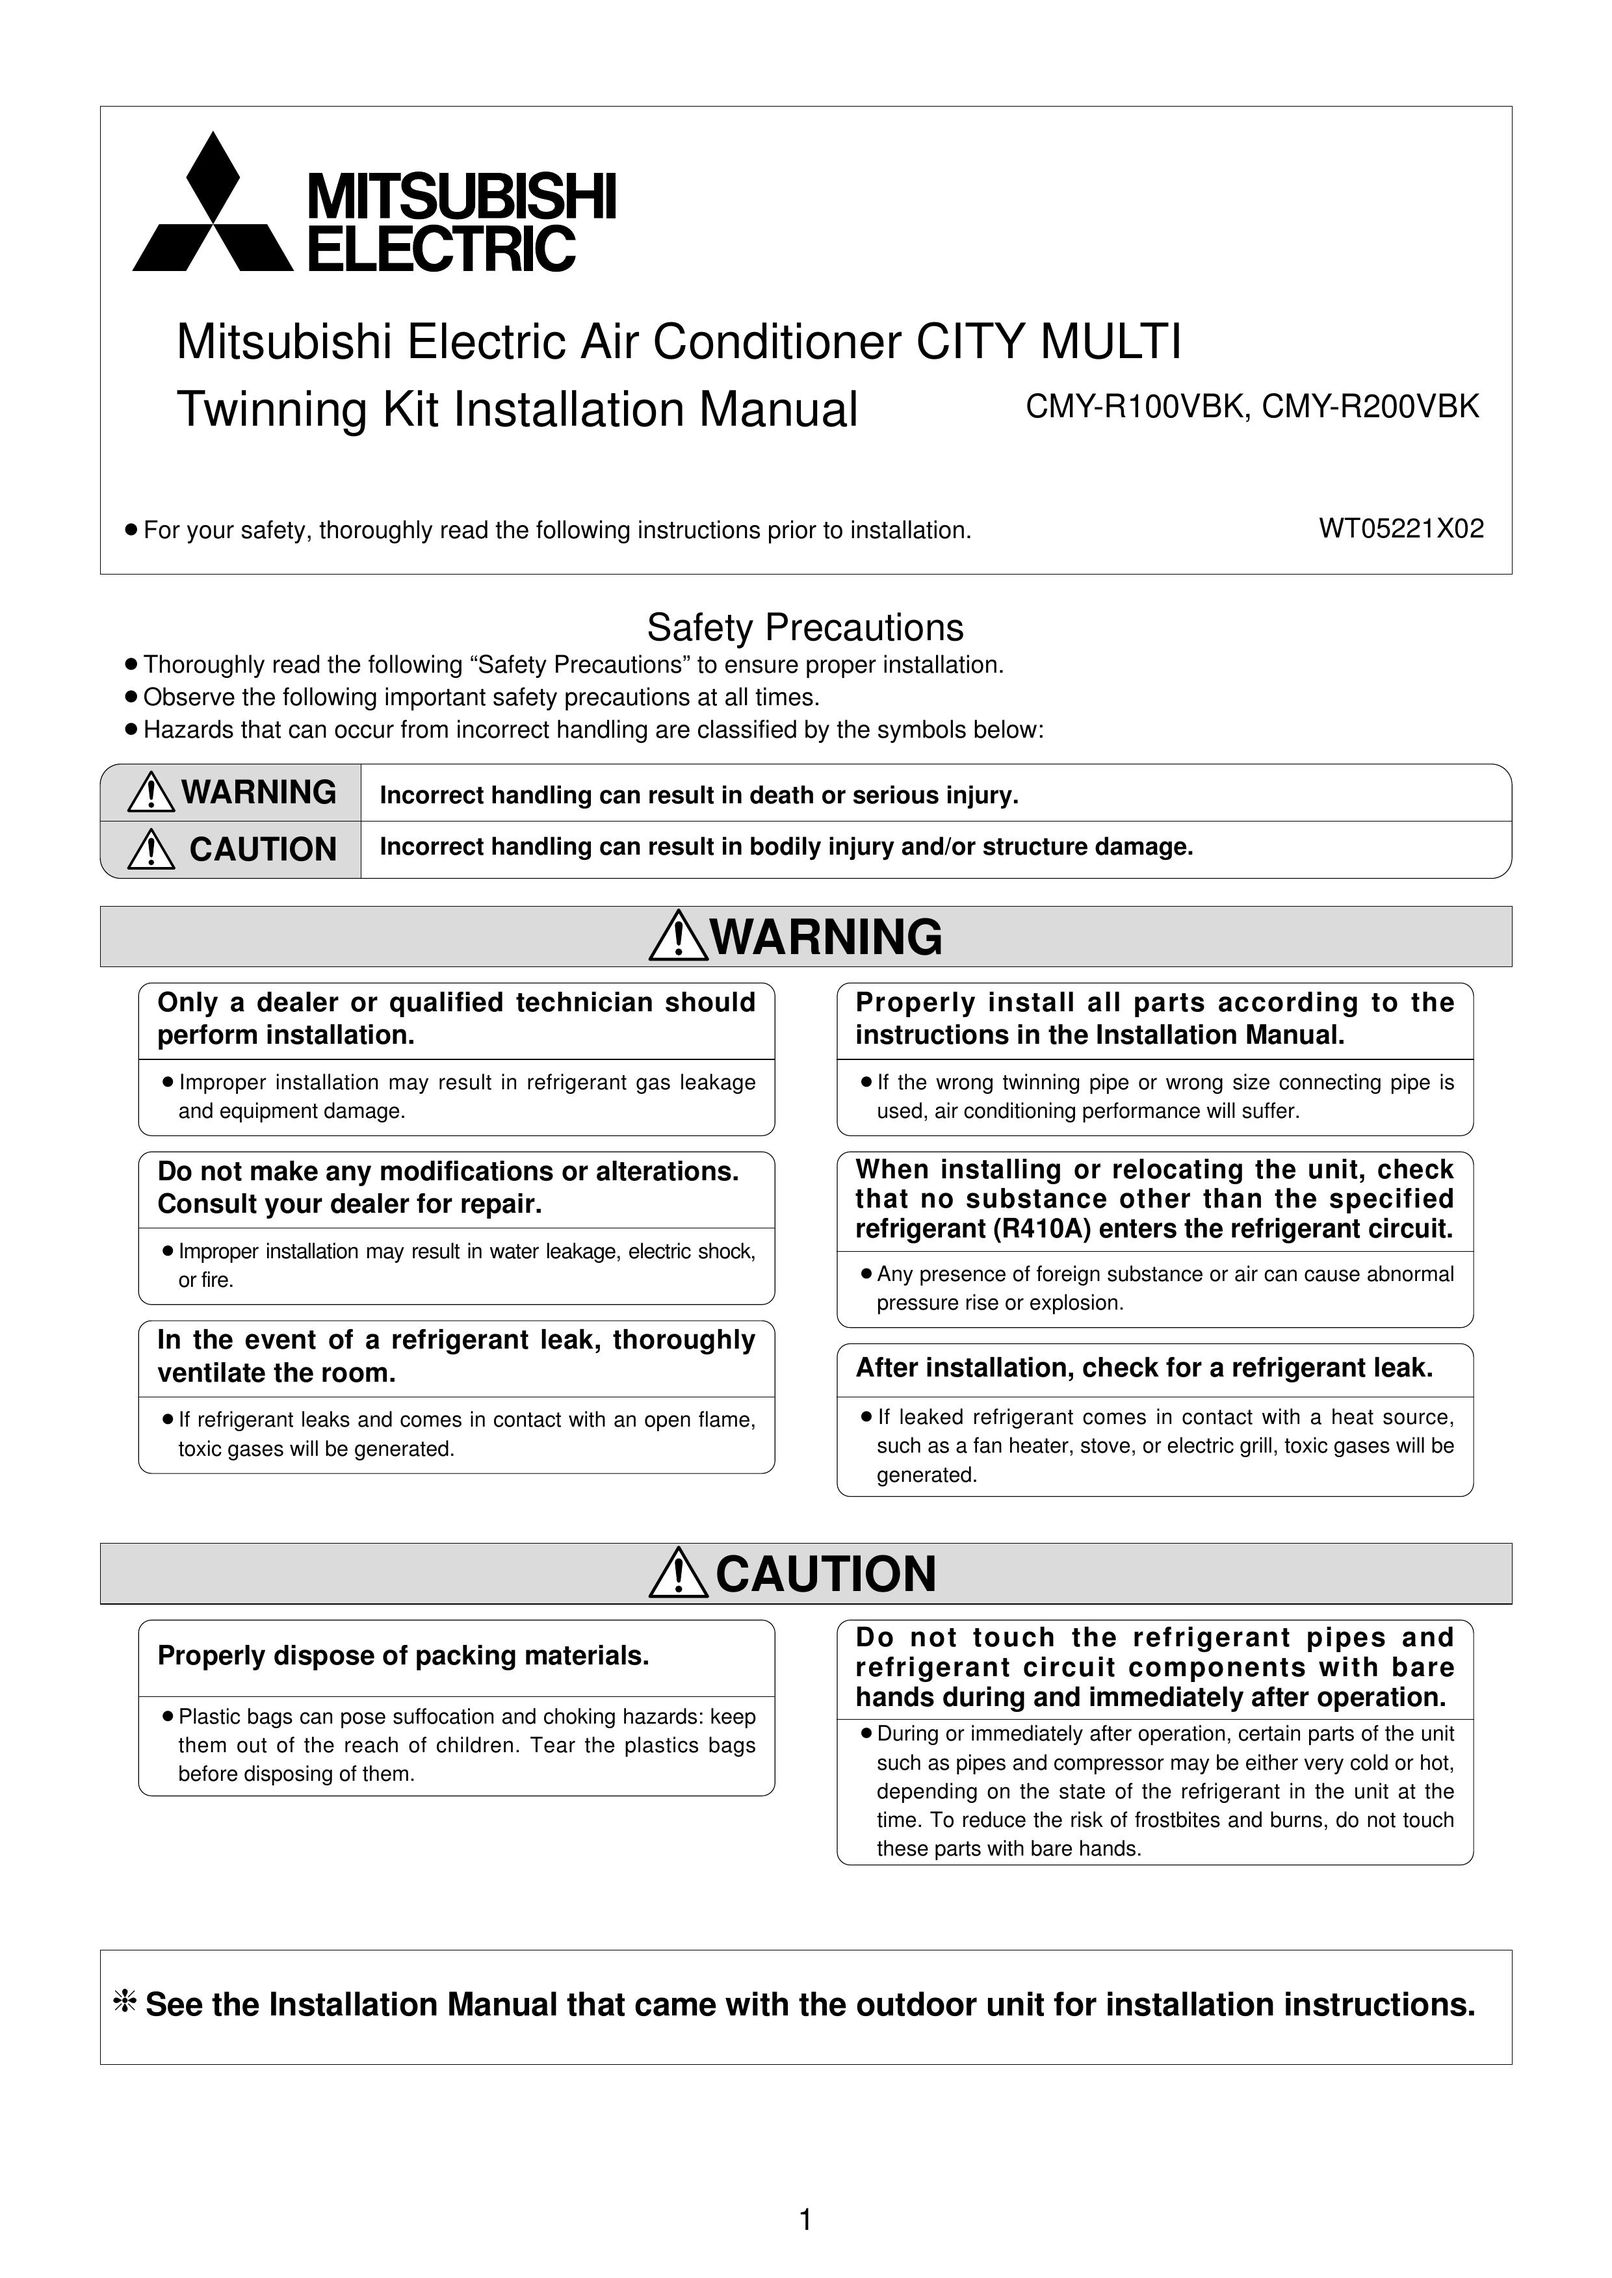 Mitsumi electronic CMY-R100VBK Air Conditioner User Manual